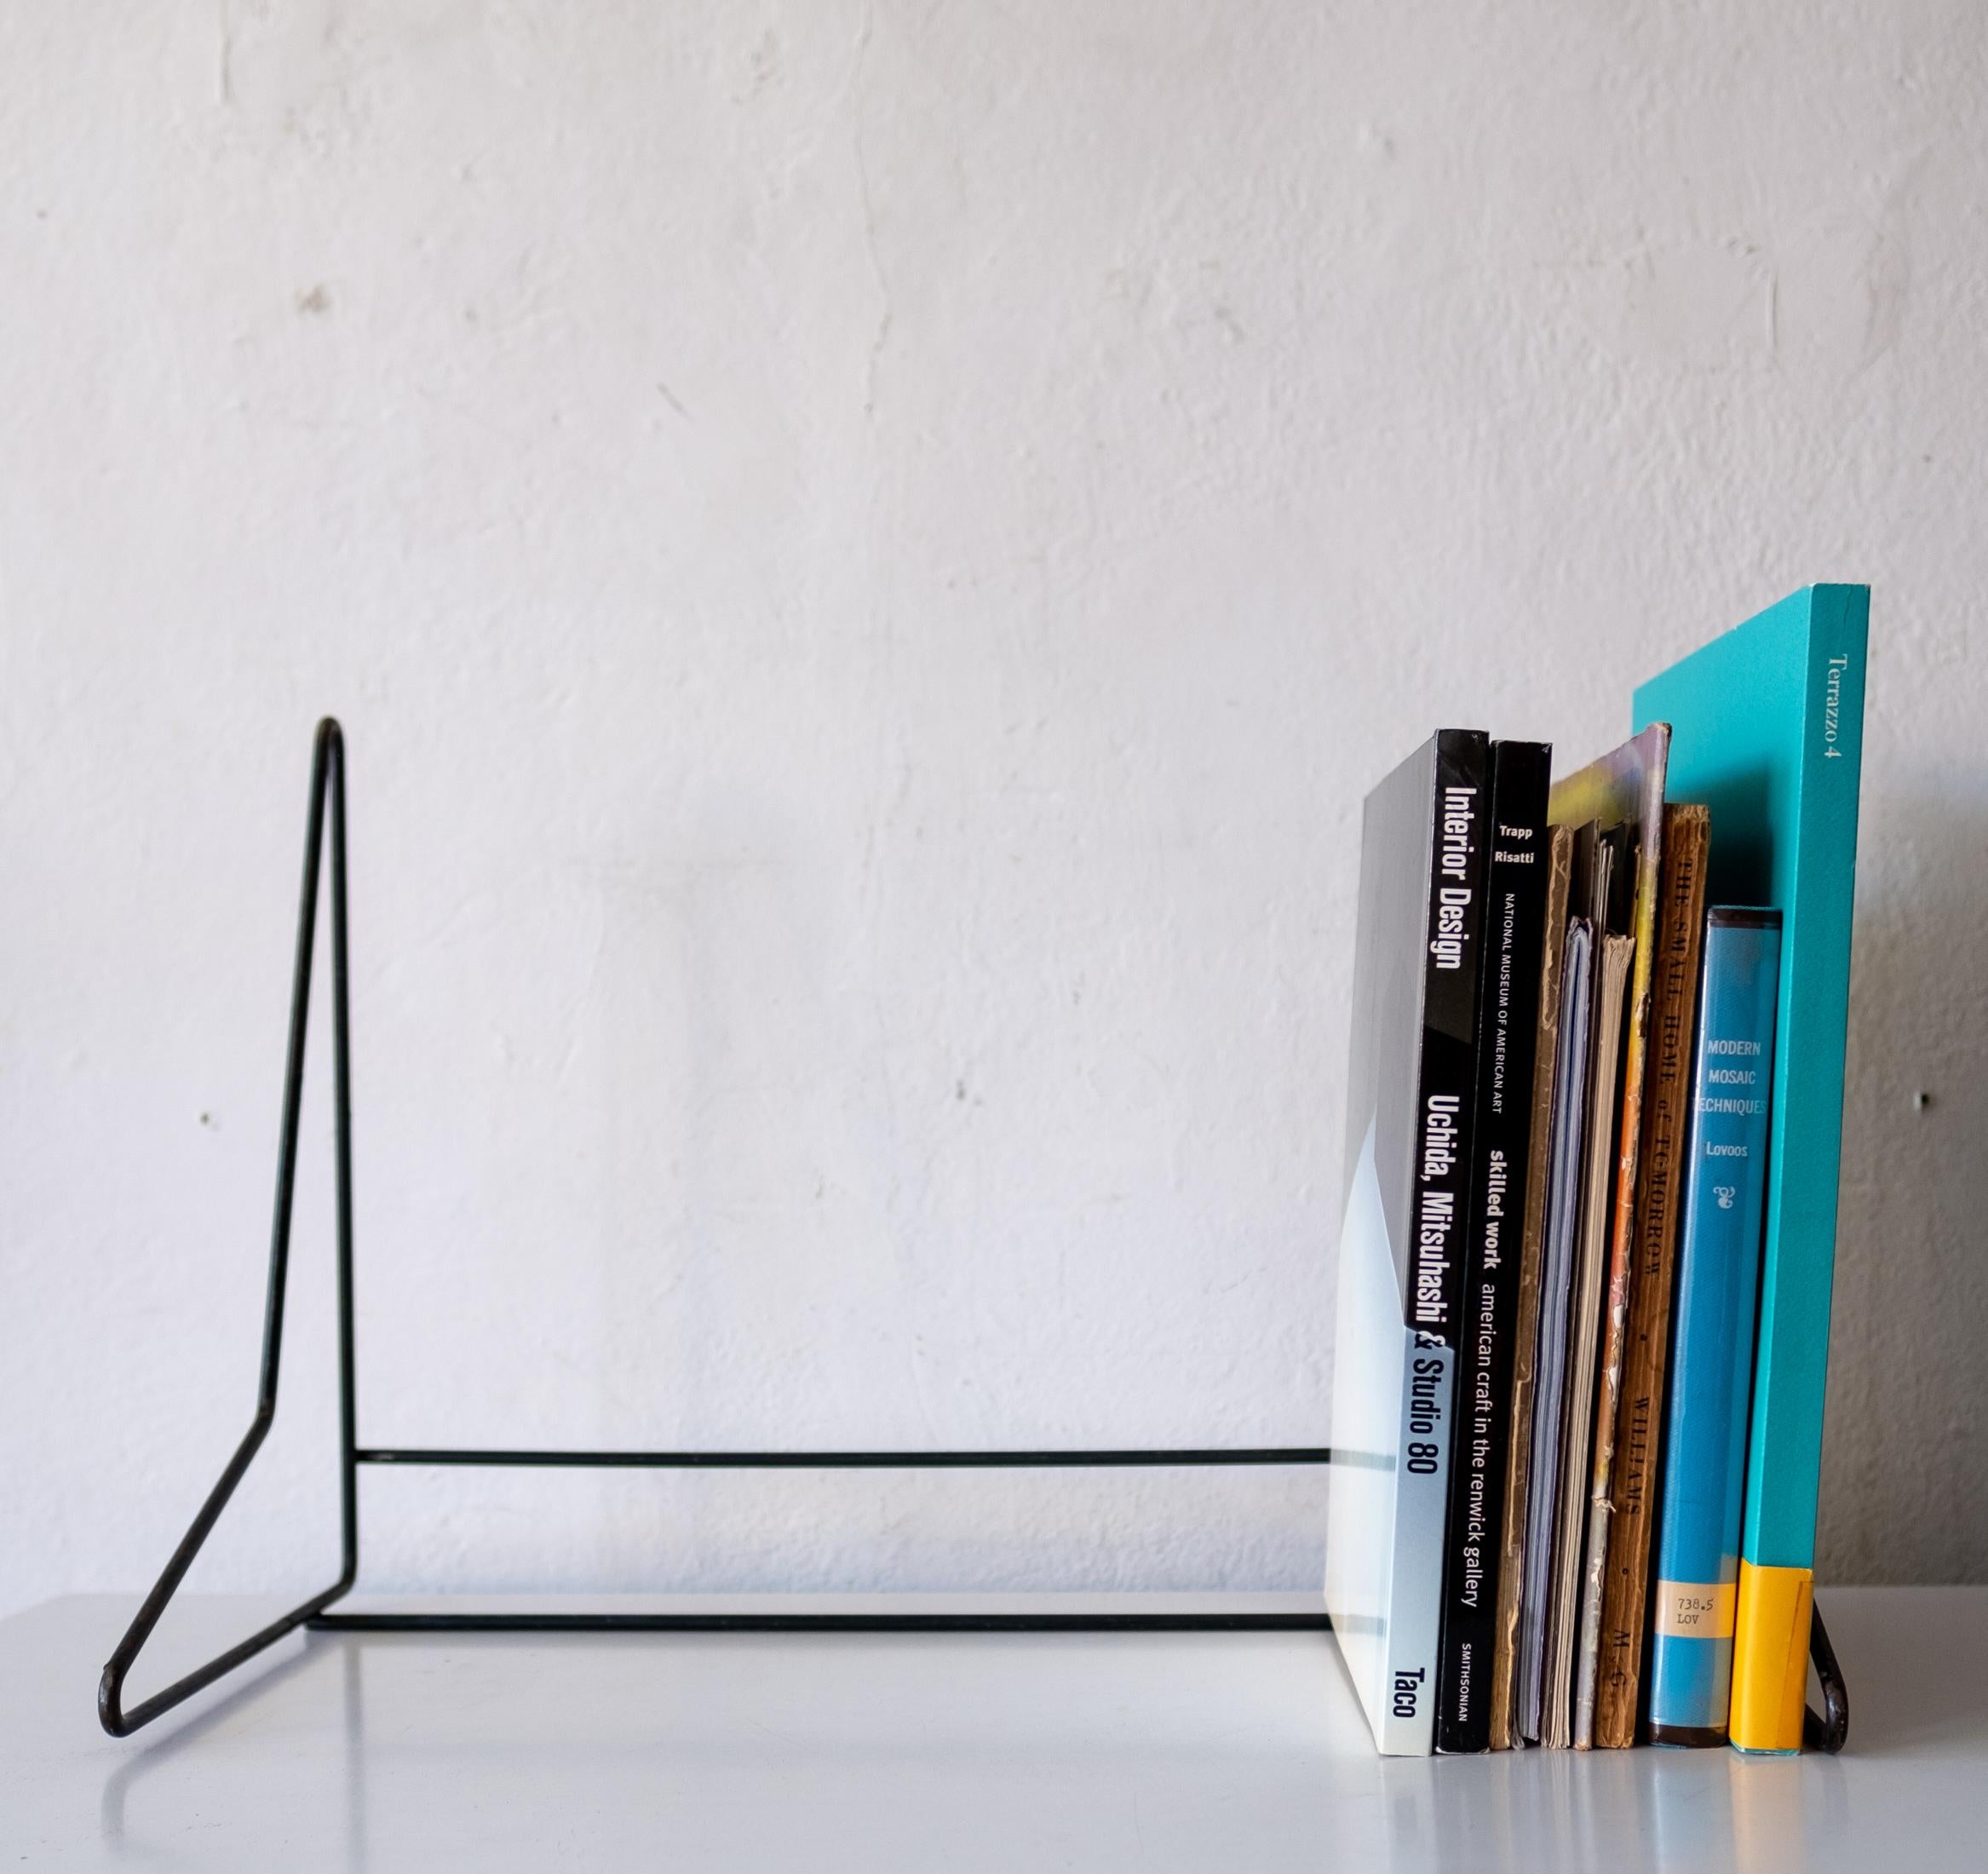 Modernist book stand from the 1950s. Great design for use on a desk or table. Black enameled metal.